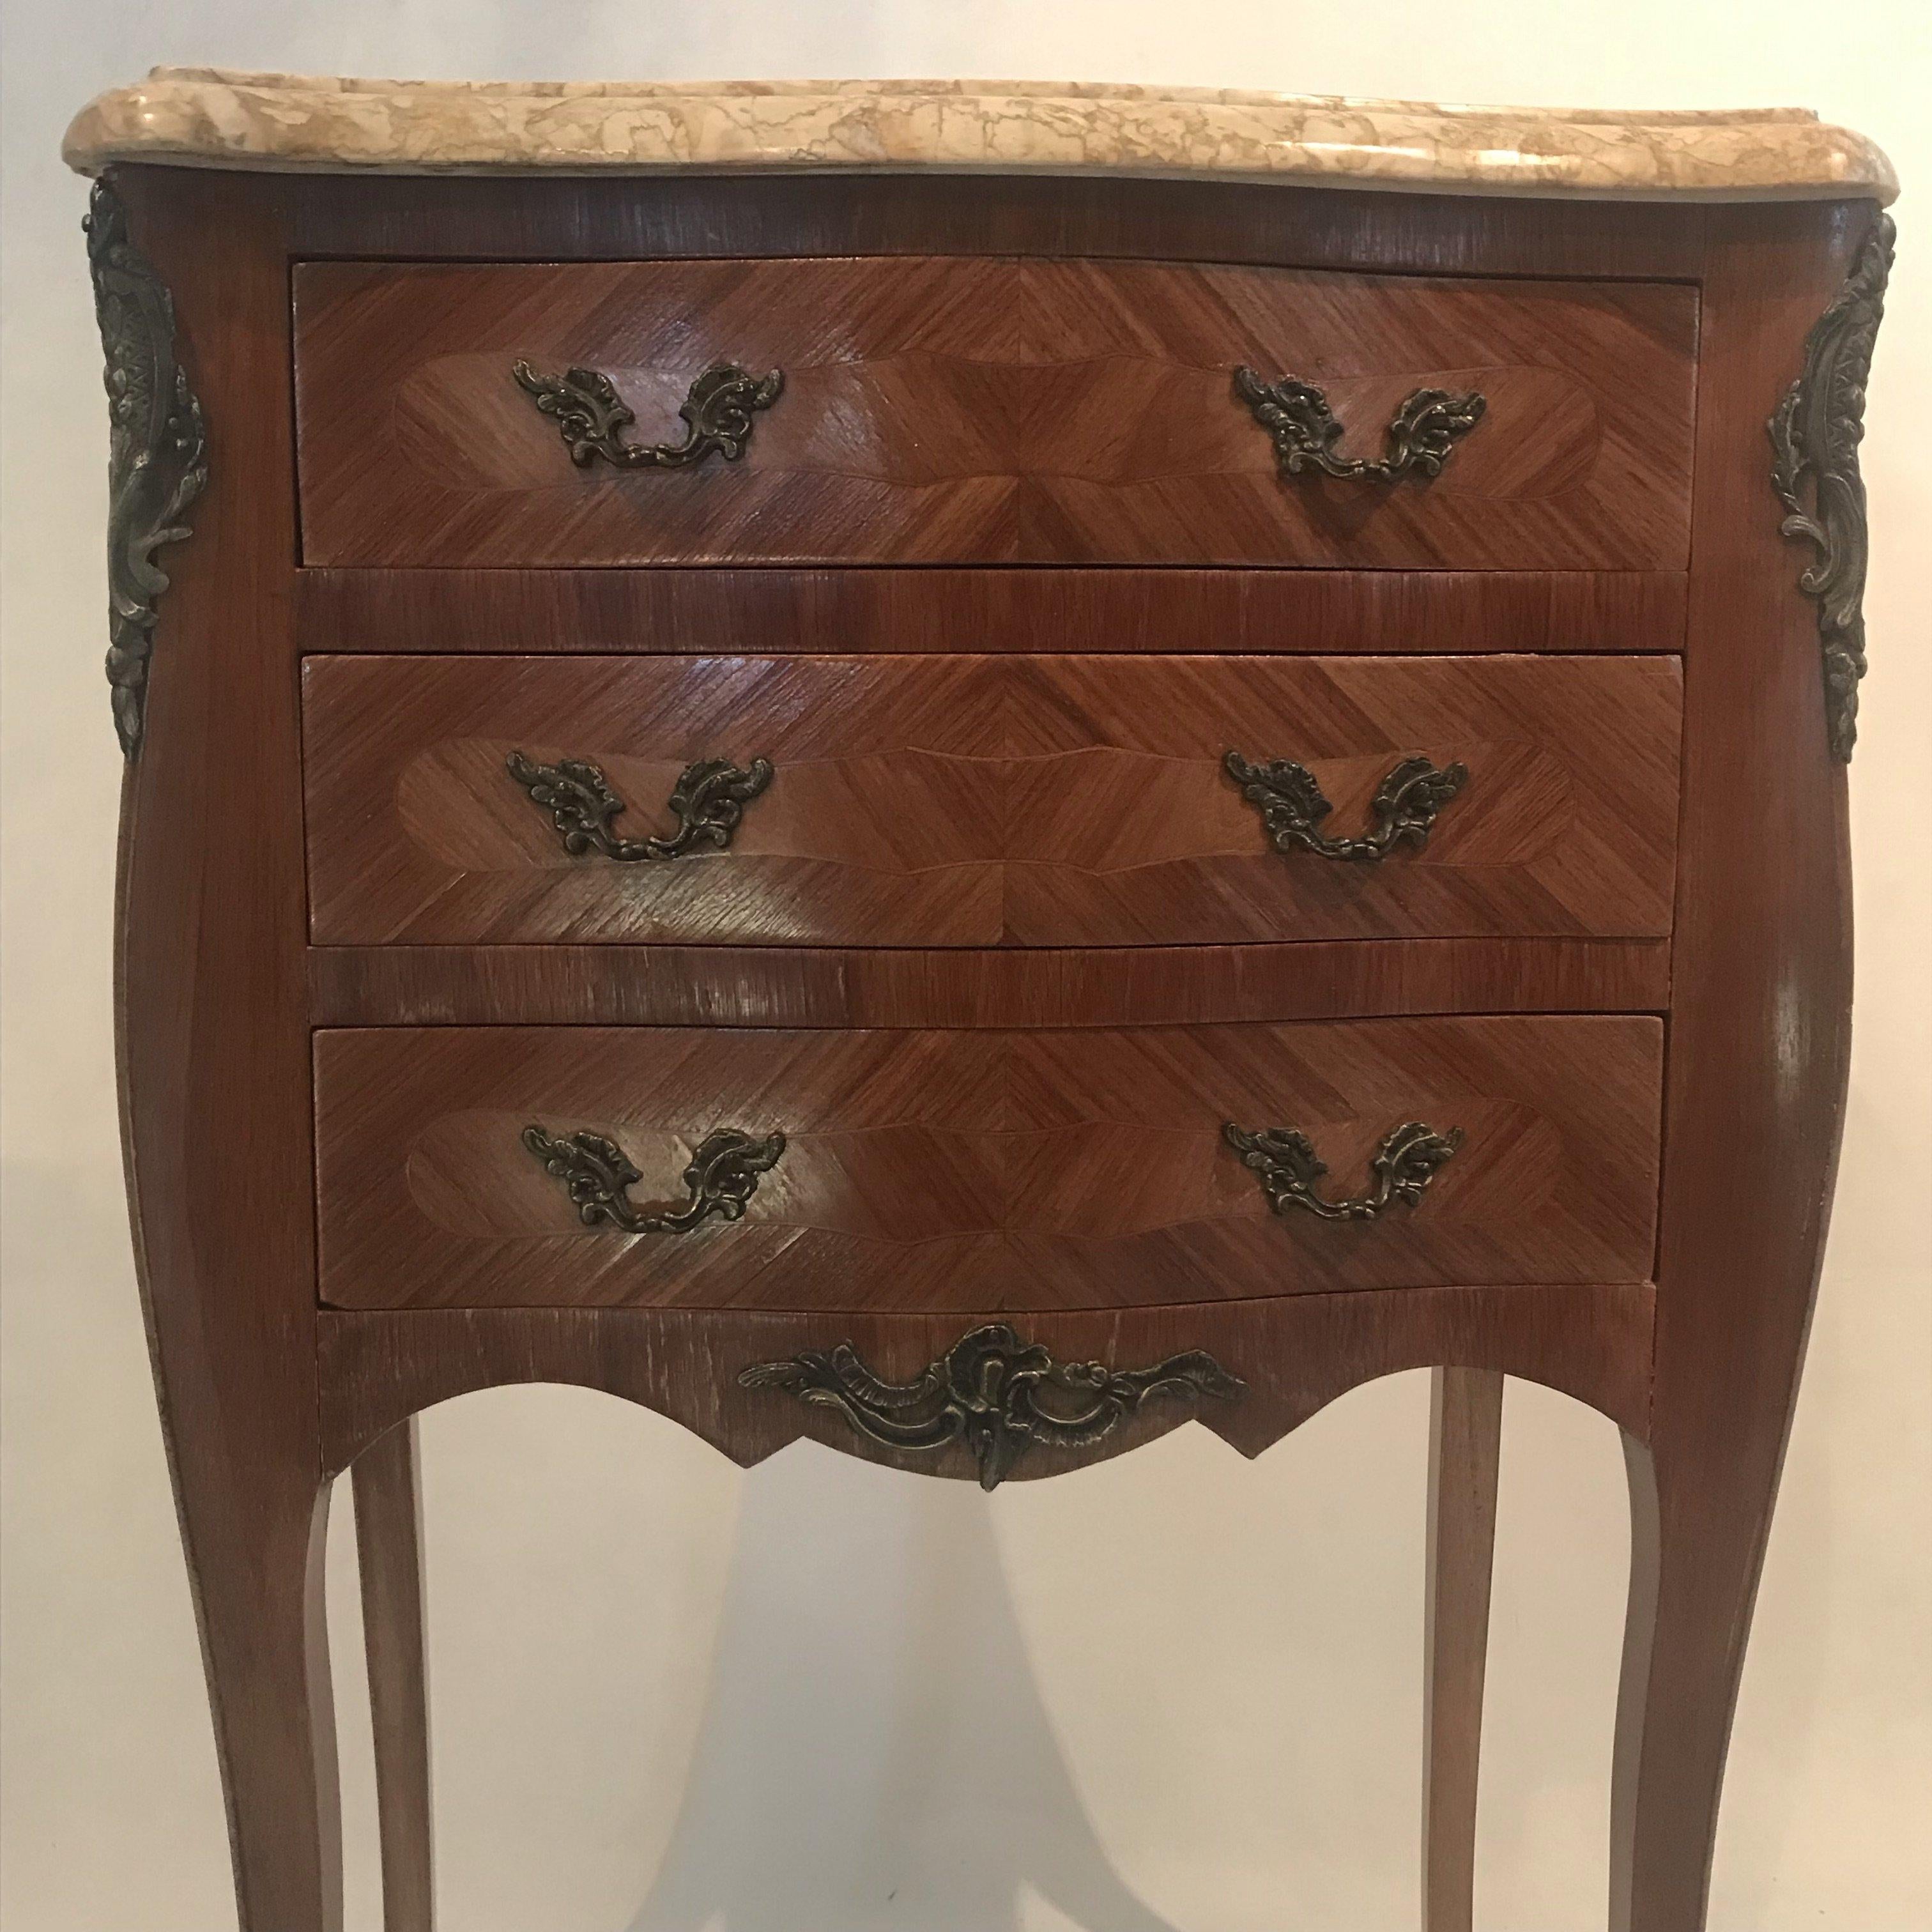 Beautiful slightly larger French inlaid marble-top nightstands with three spacious drawers. Bought in Lyon, France. Gorgeous marble top with beige and brown veining.
#4866.